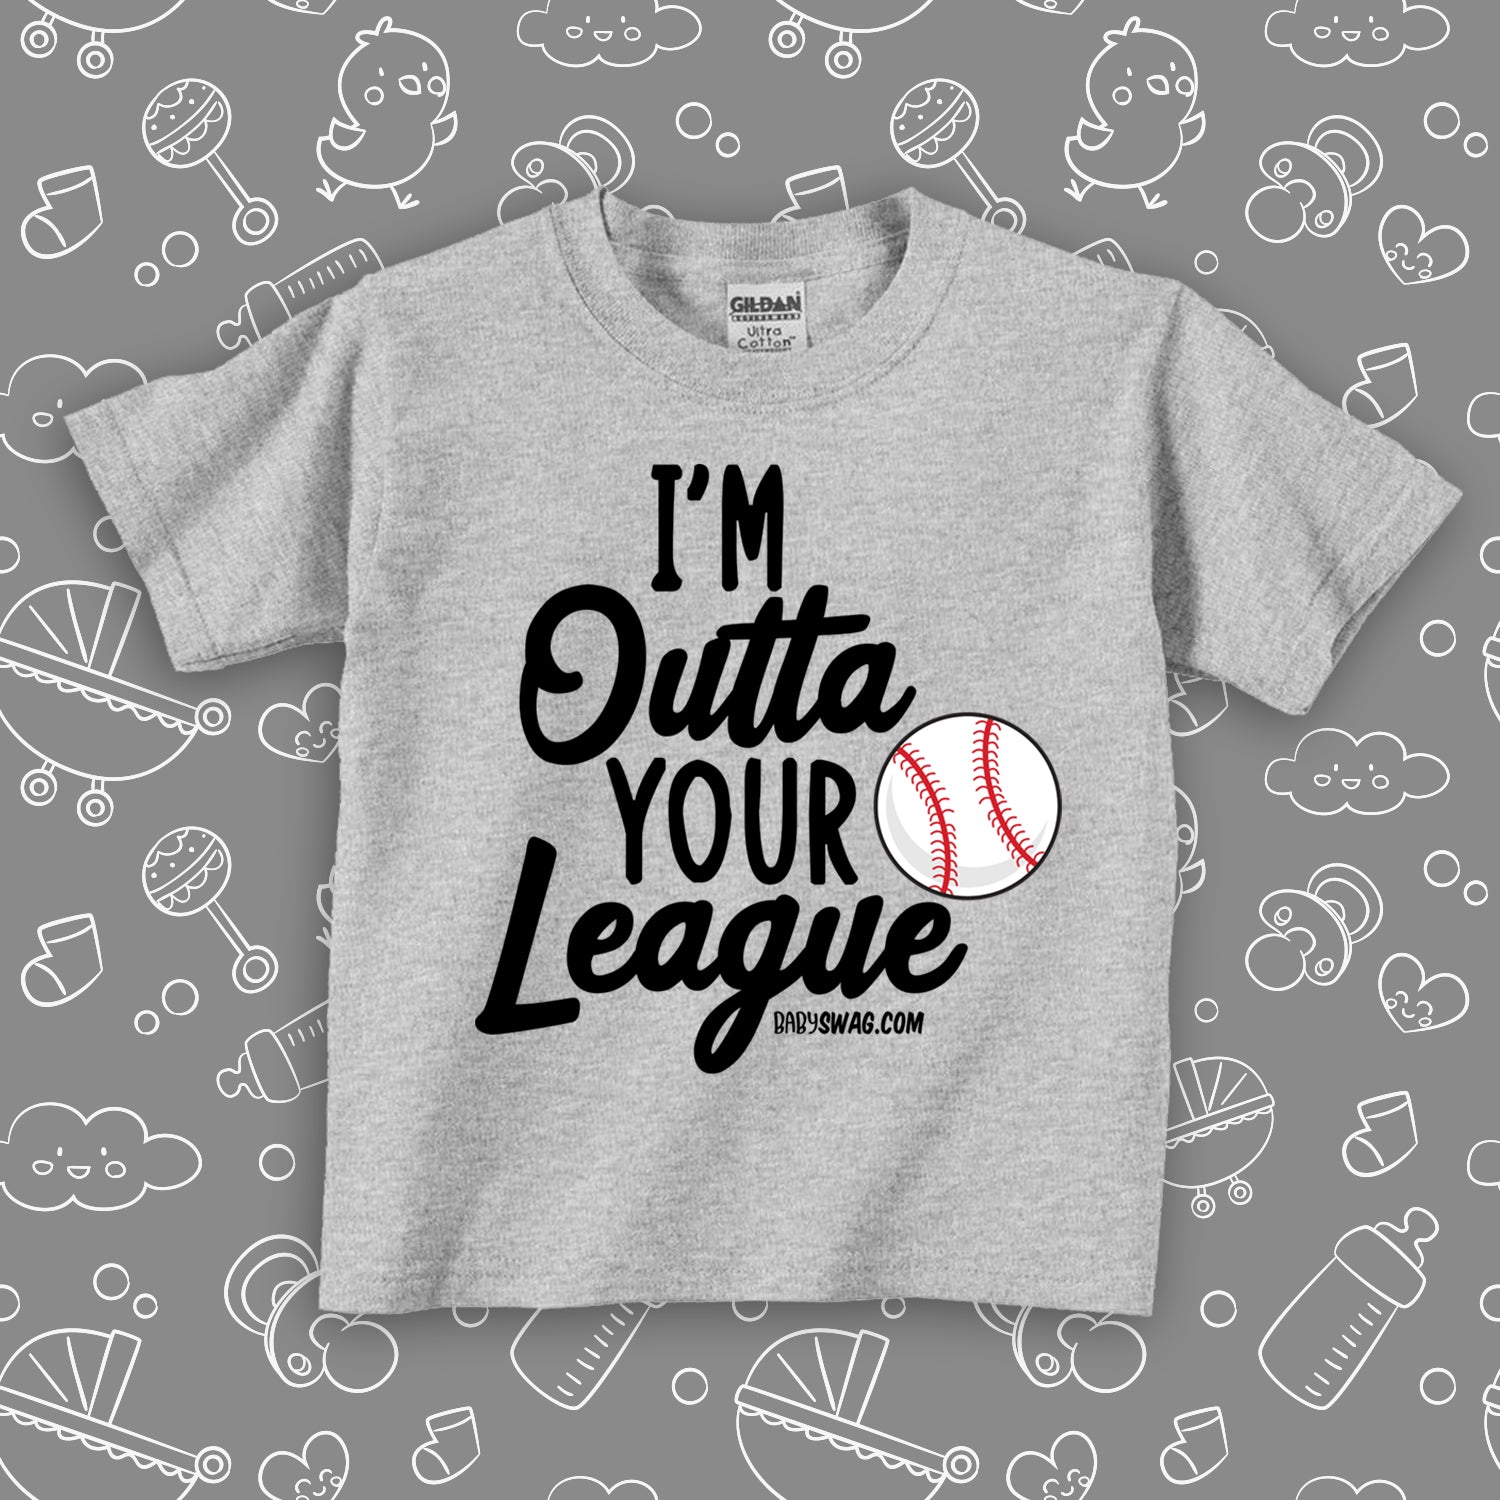 Toddler boy shirt with saying "I'm Outta Your League" in grey. 